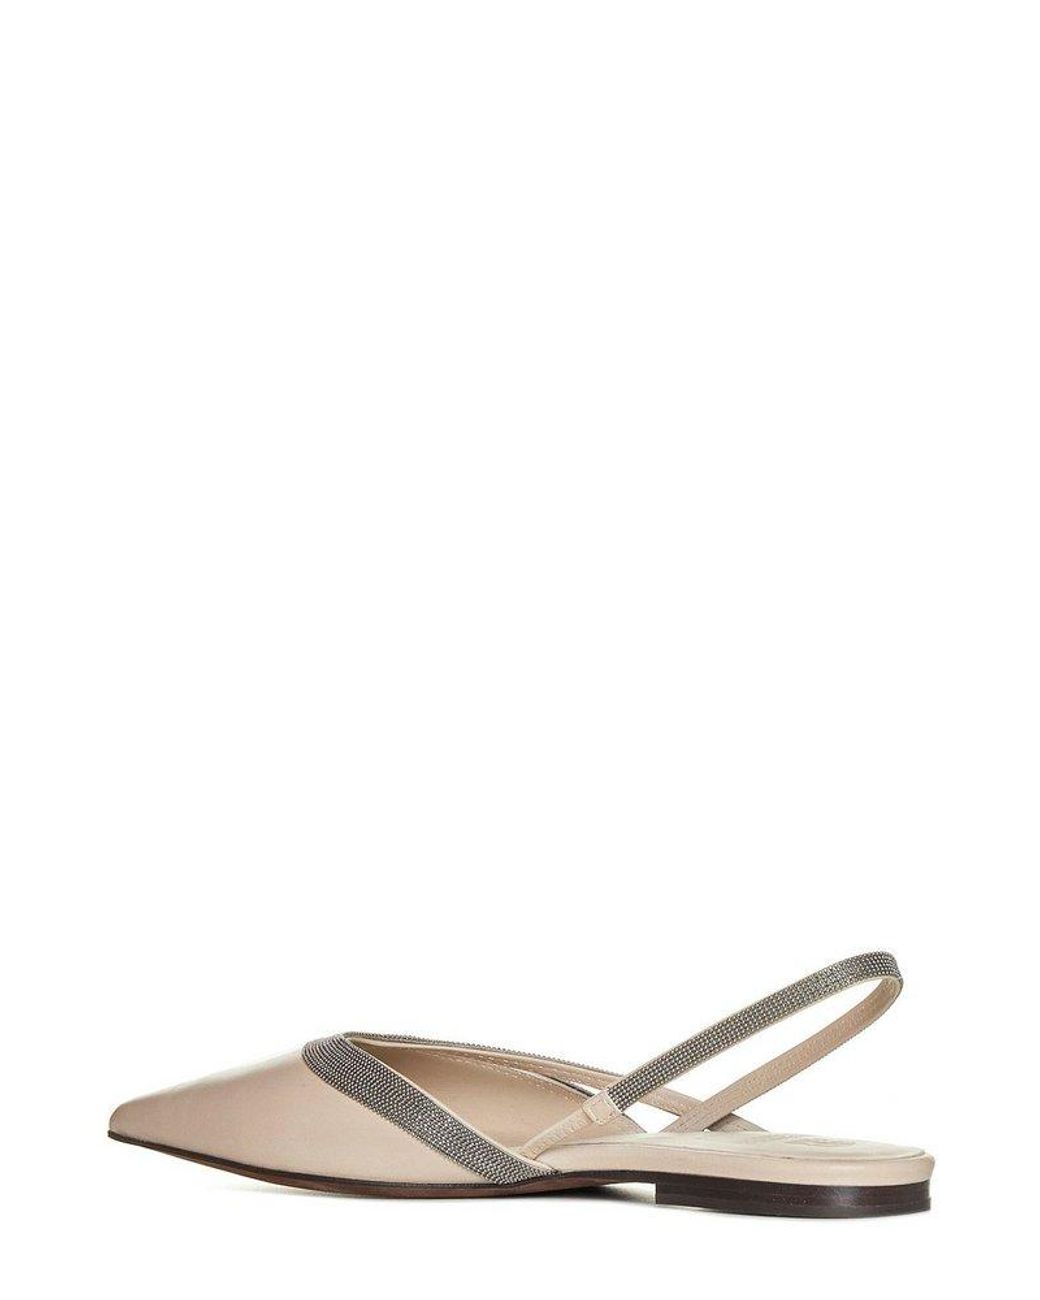 Brunello Cucinelli Pointed Toe Slingback Ballerine Shoes in White | Lyst